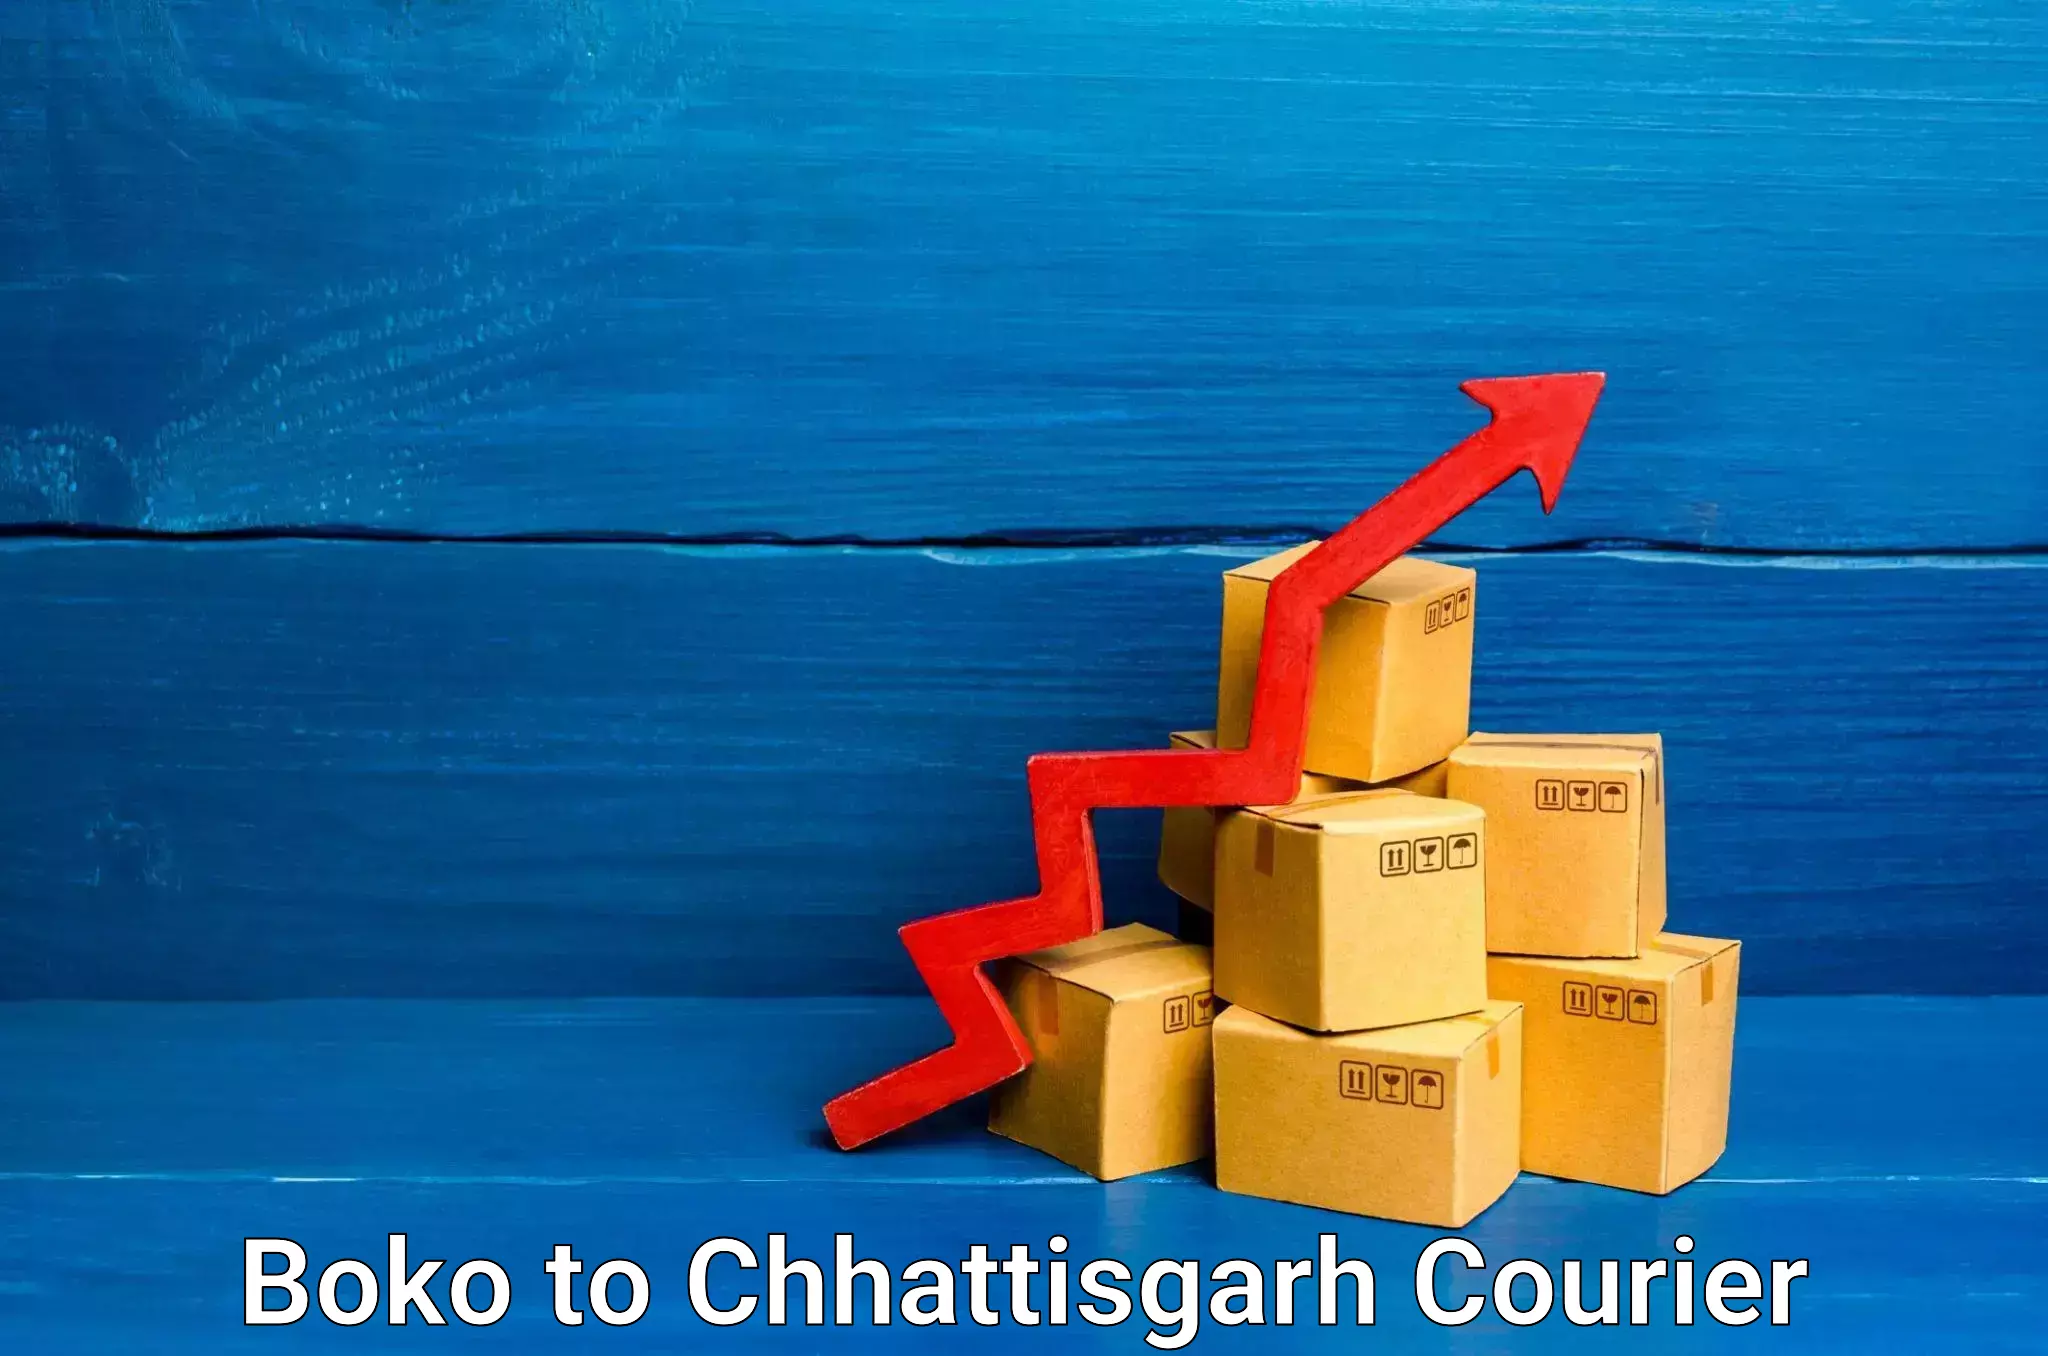 Cost-effective shipping solutions in Boko to Patna Chhattisgarh